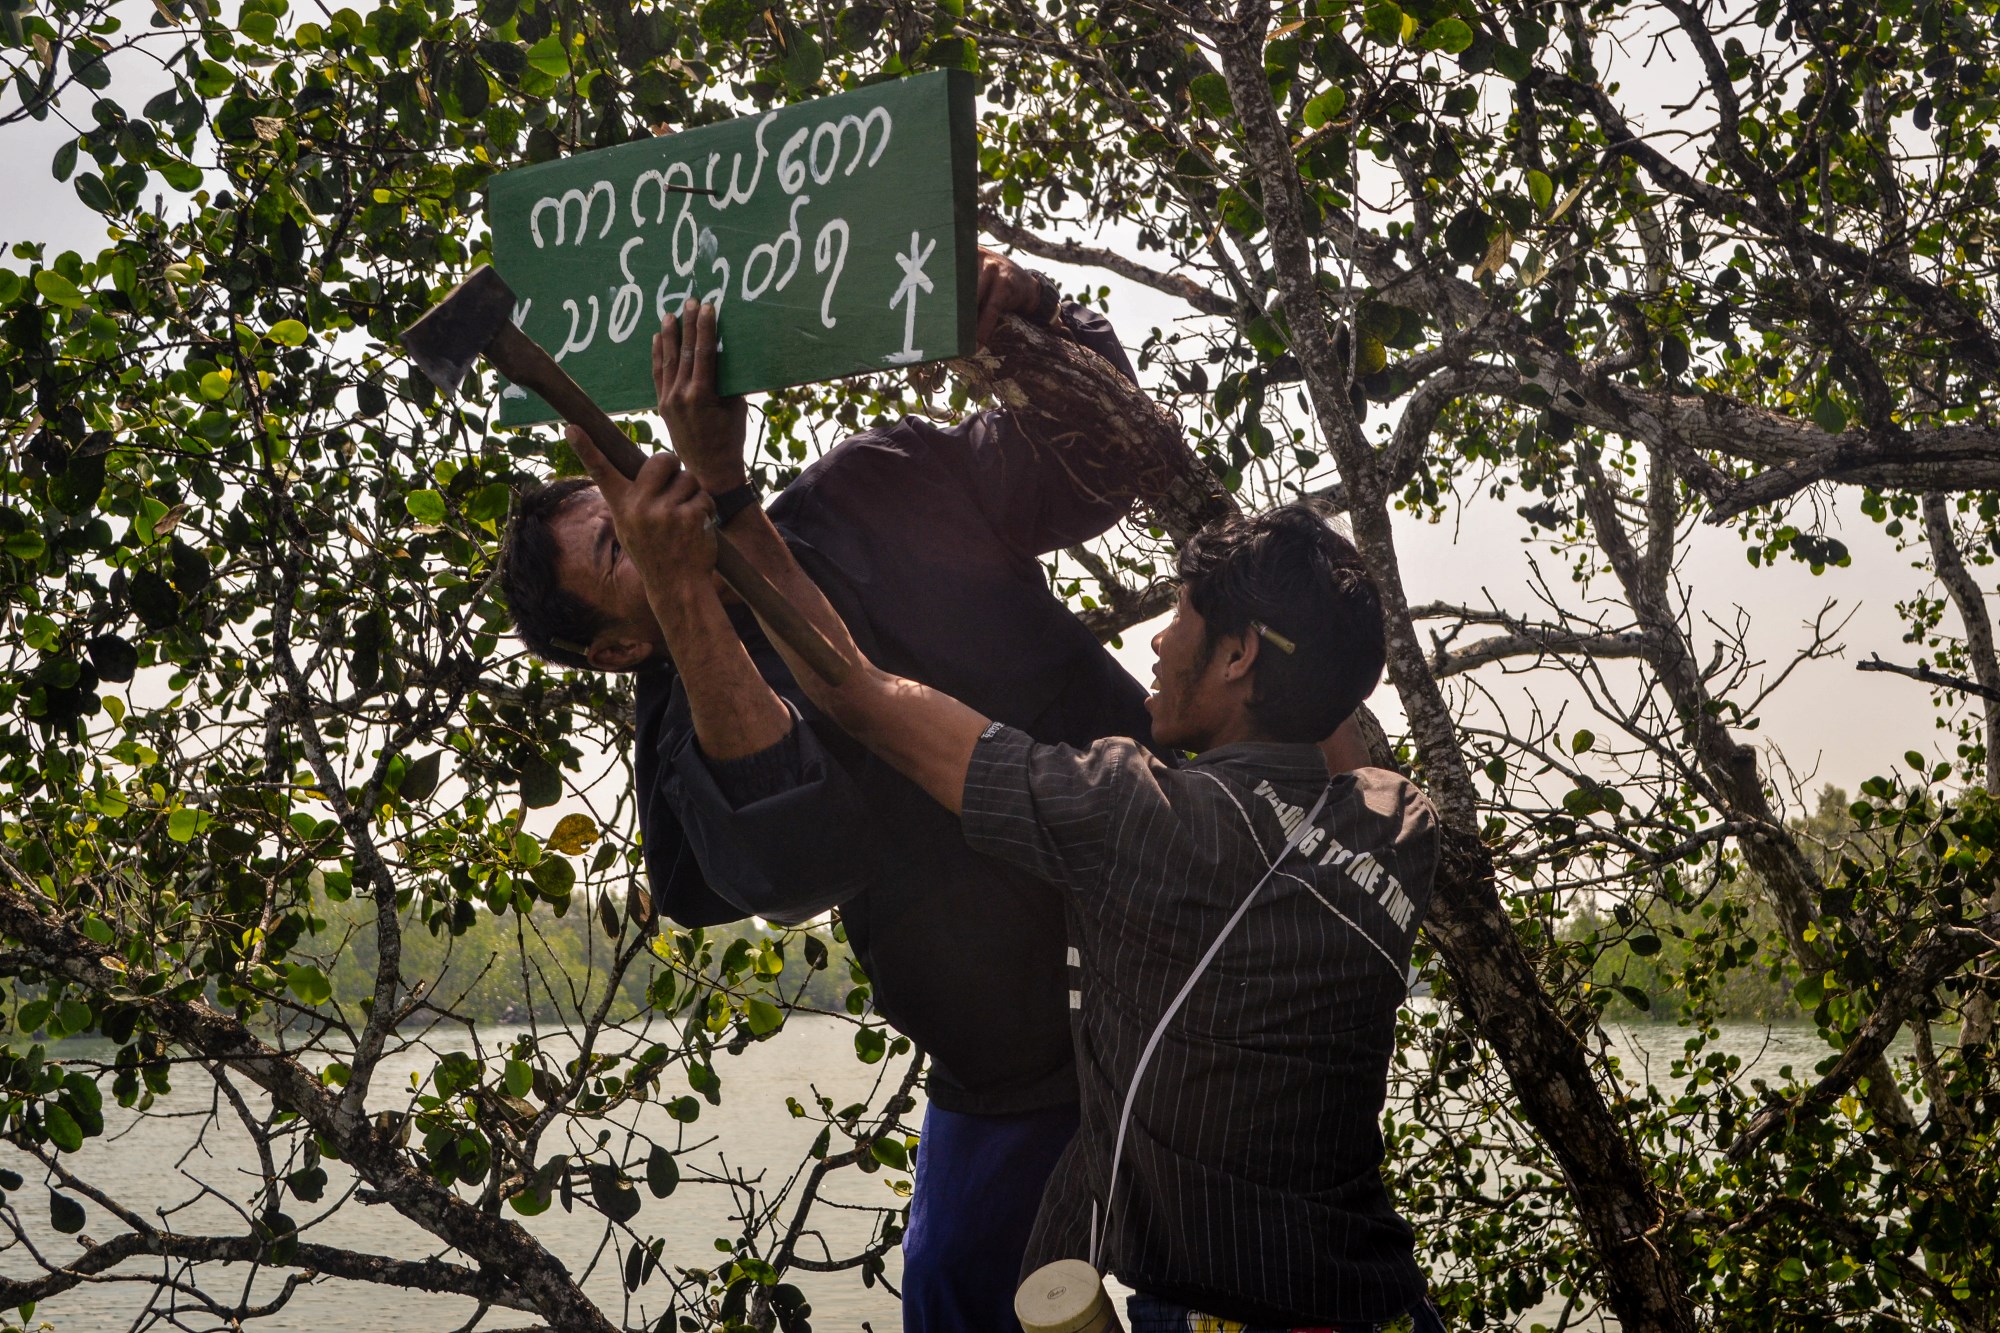 Two men in Myanmar's Tanintharyi Region hang a sign in a mangrove forest that reads: "This area is protected. Do not cut down trees.".